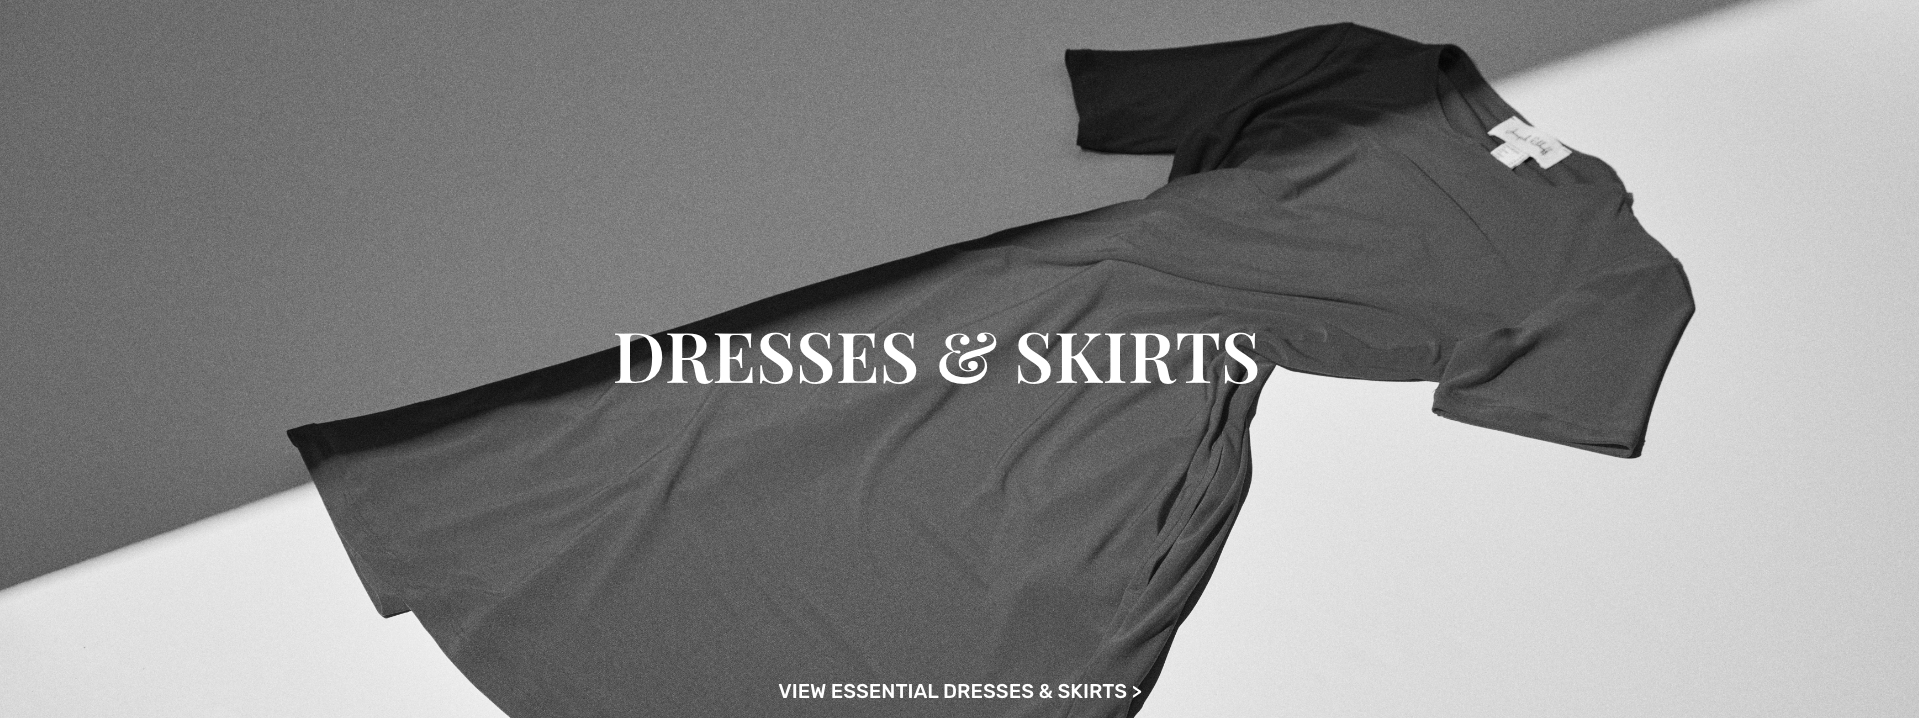 View Essential Dresses & Skirts >